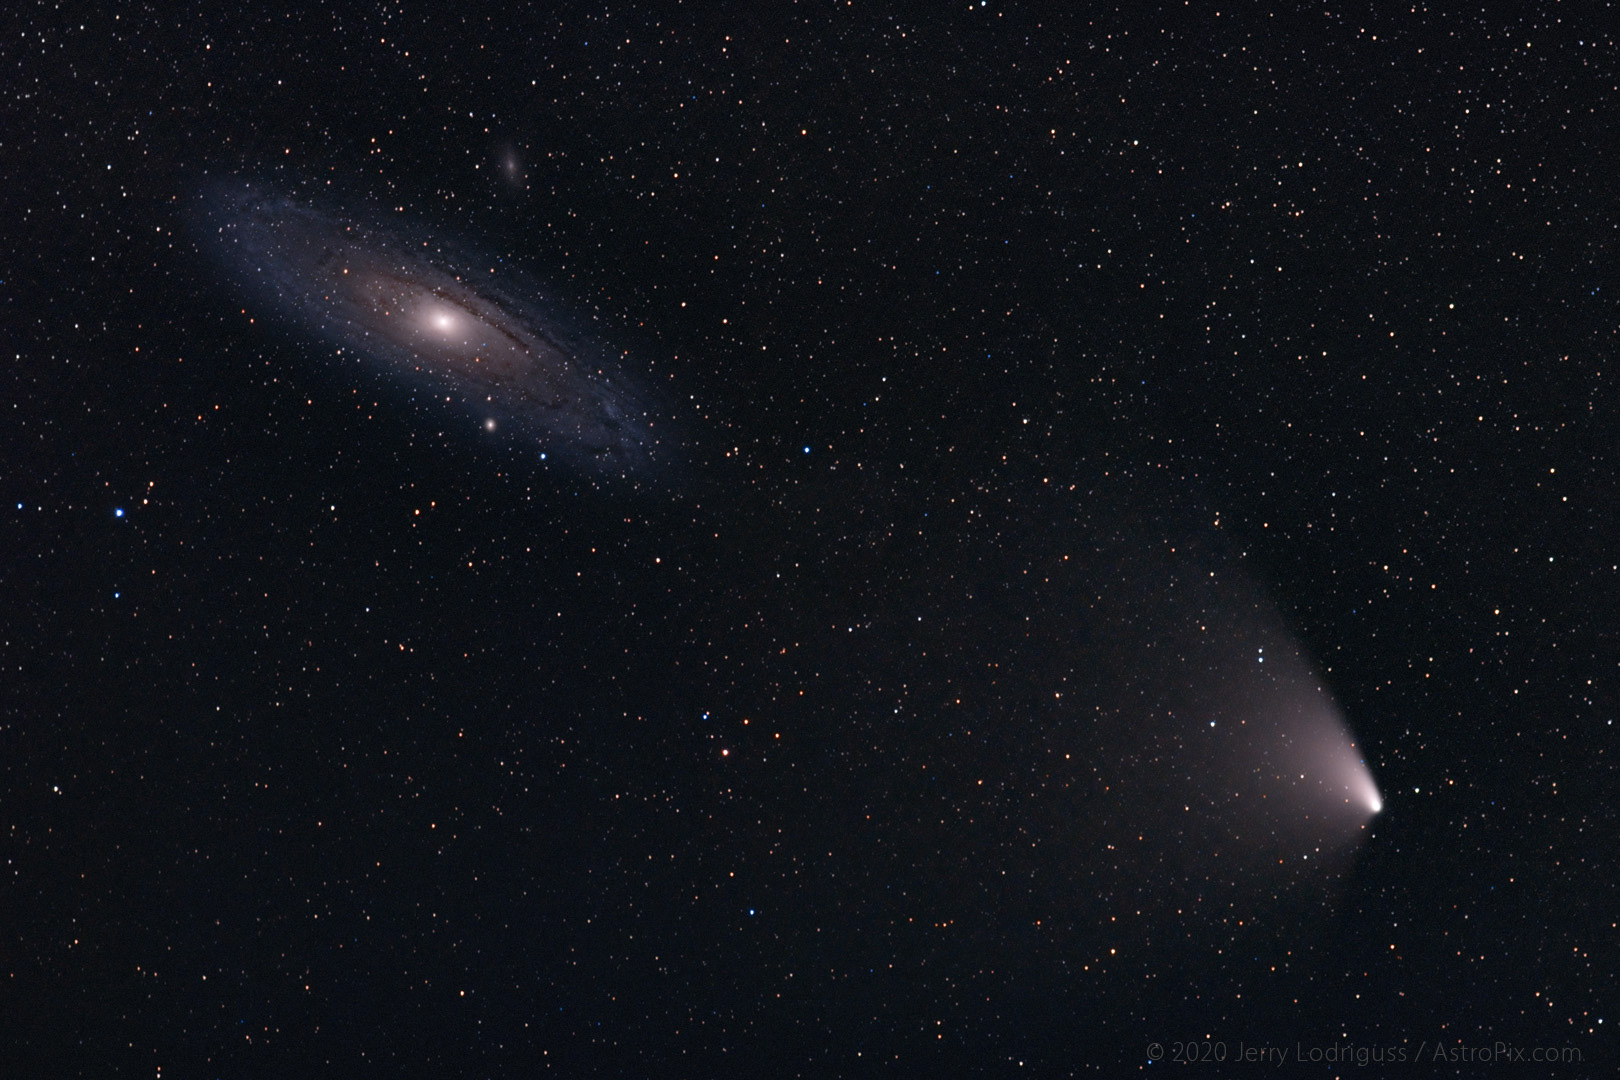 Comet PanSTARRS (C/2011 L4) passes near M31, the Andromeda Galaxy on the morning of April 2, 2013.